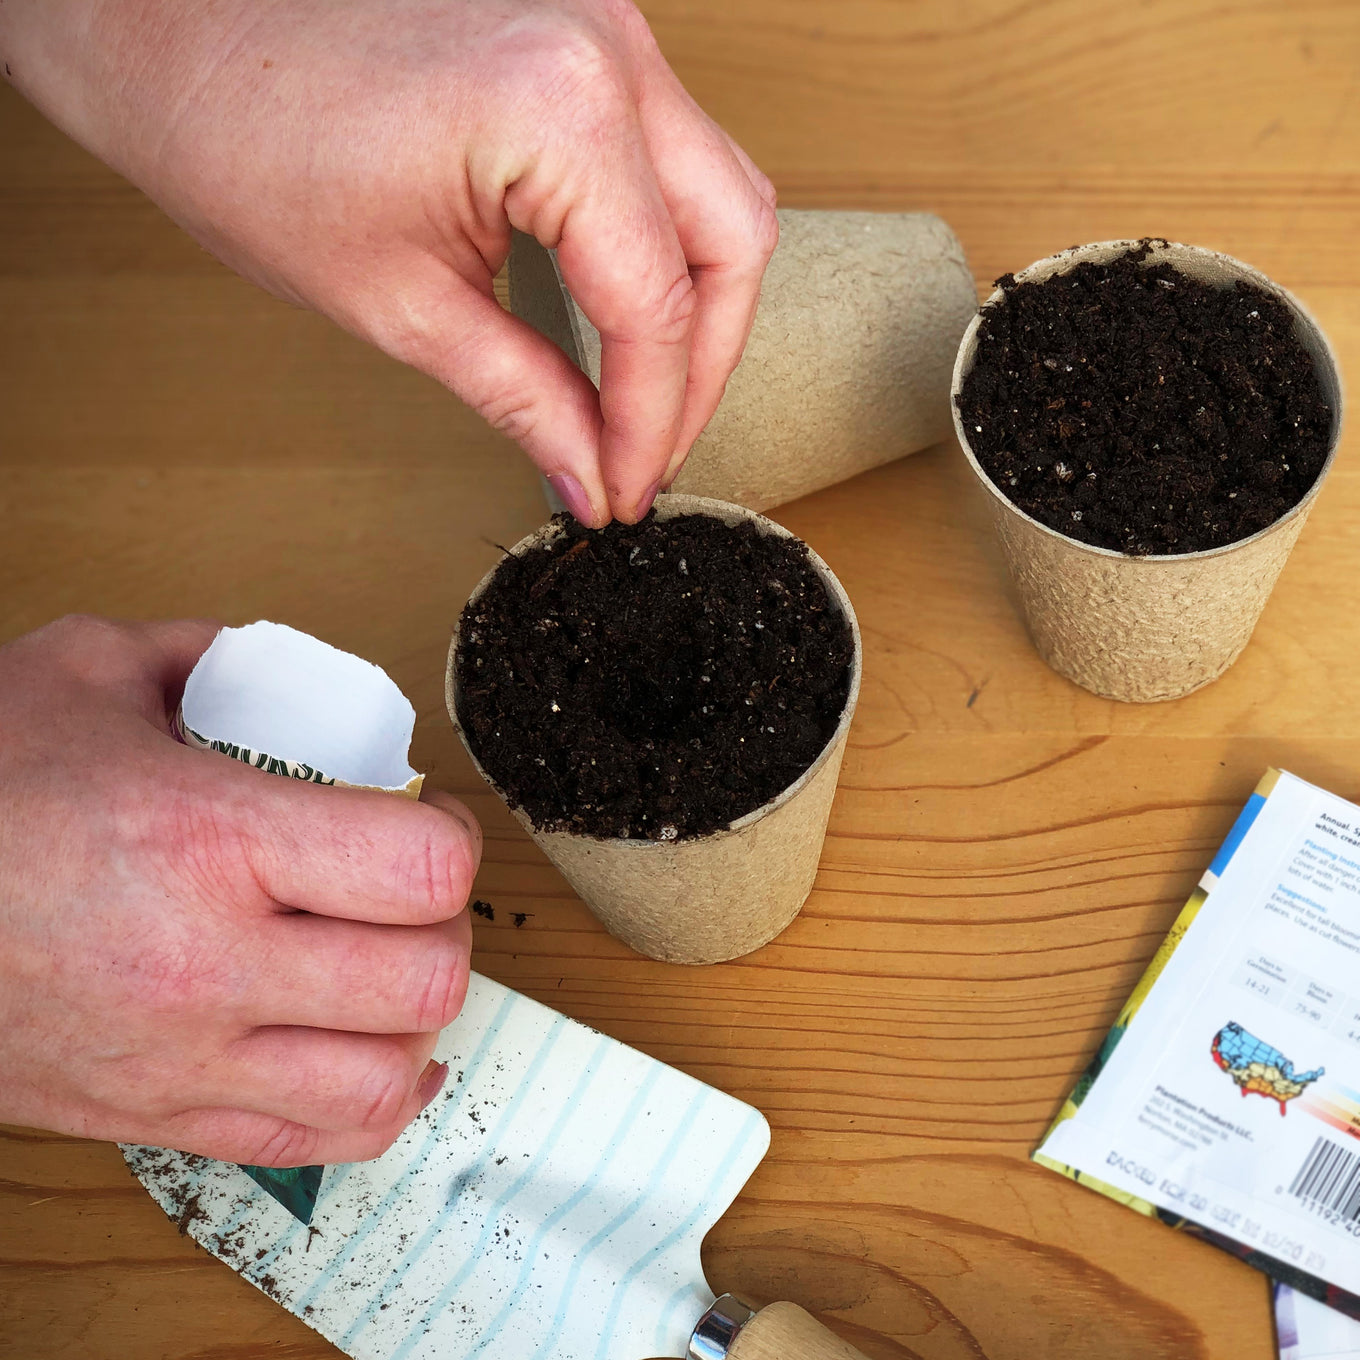 Start Texas Bluebonnet seeds in 3" peat pots roughly 8 weeks before your final frost.